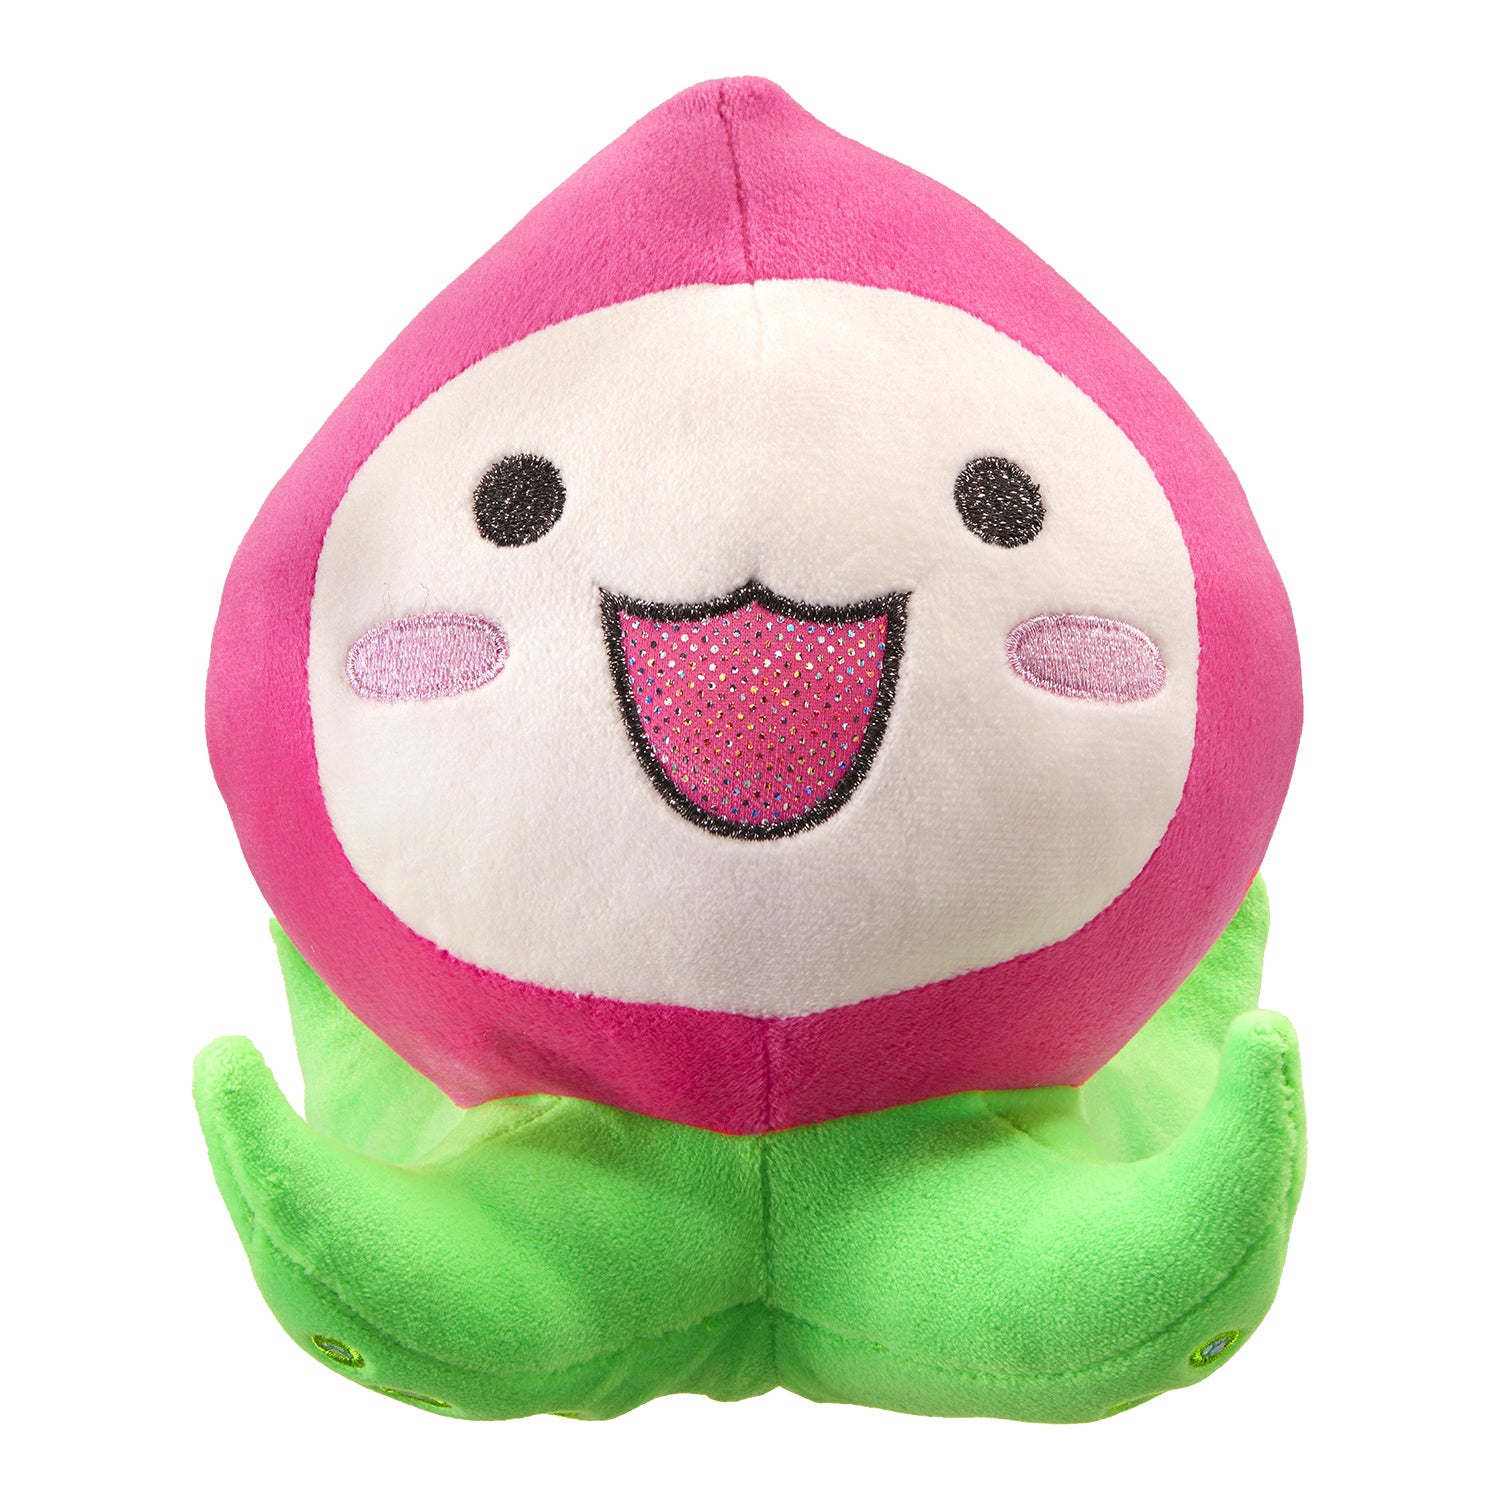 Overwatch 2 Pachimari Plush Convention Variant - Front View